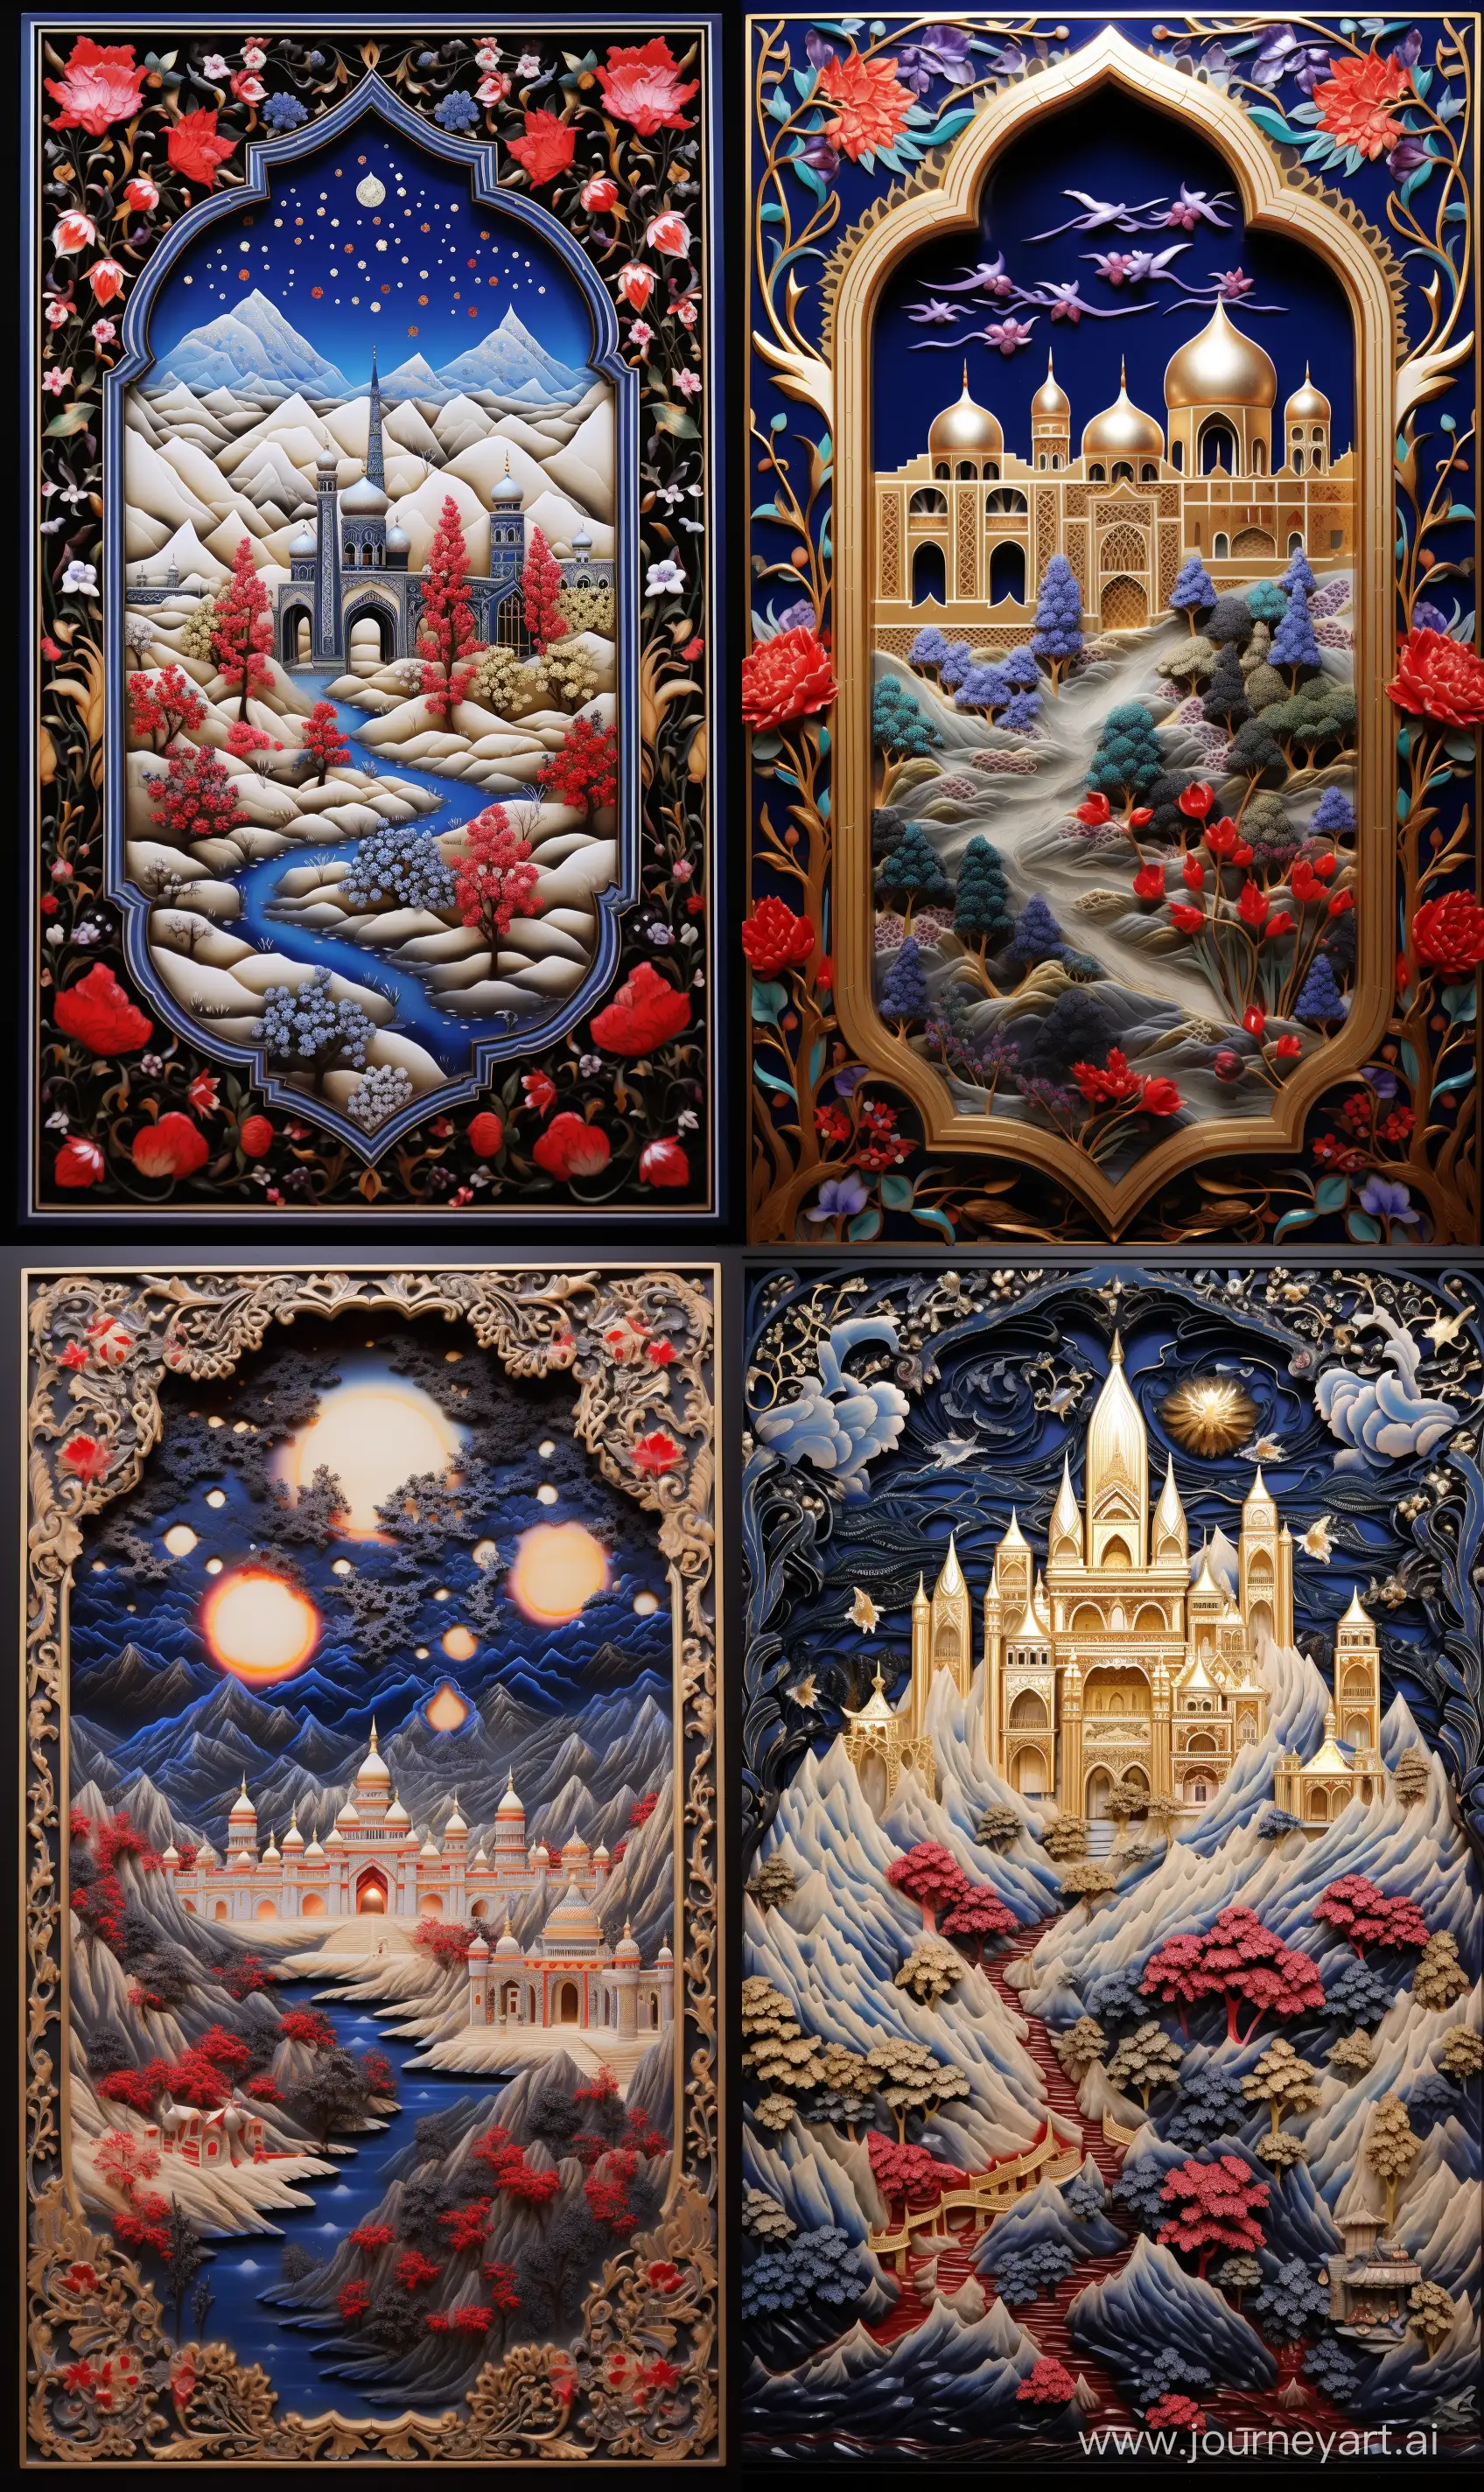 Blue red white black "Persian miniature painting" style scenery embossed on Porcelain panel, 3D embossing, shiny gold outlines --ar 3:5